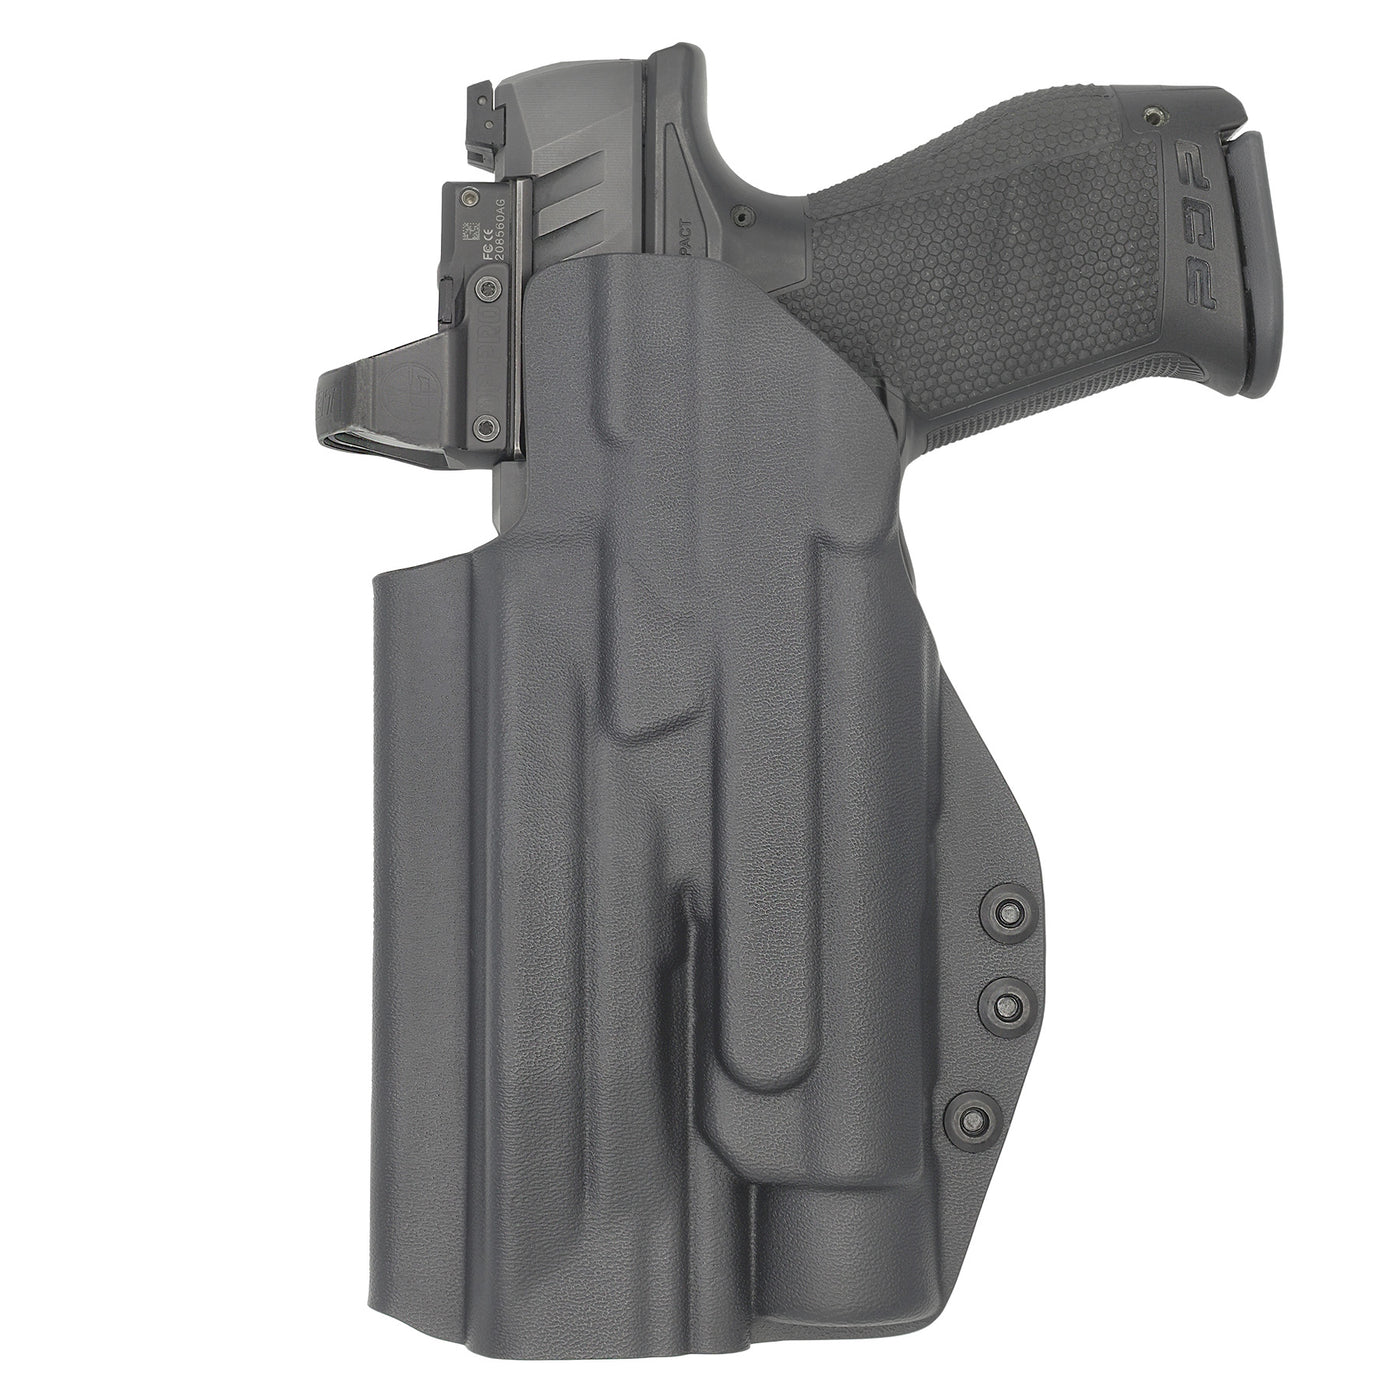 C&G Holsters Quickship IWB Tactical S&W M&P 10/45 Streamlight TLR-1 in holstered position back view